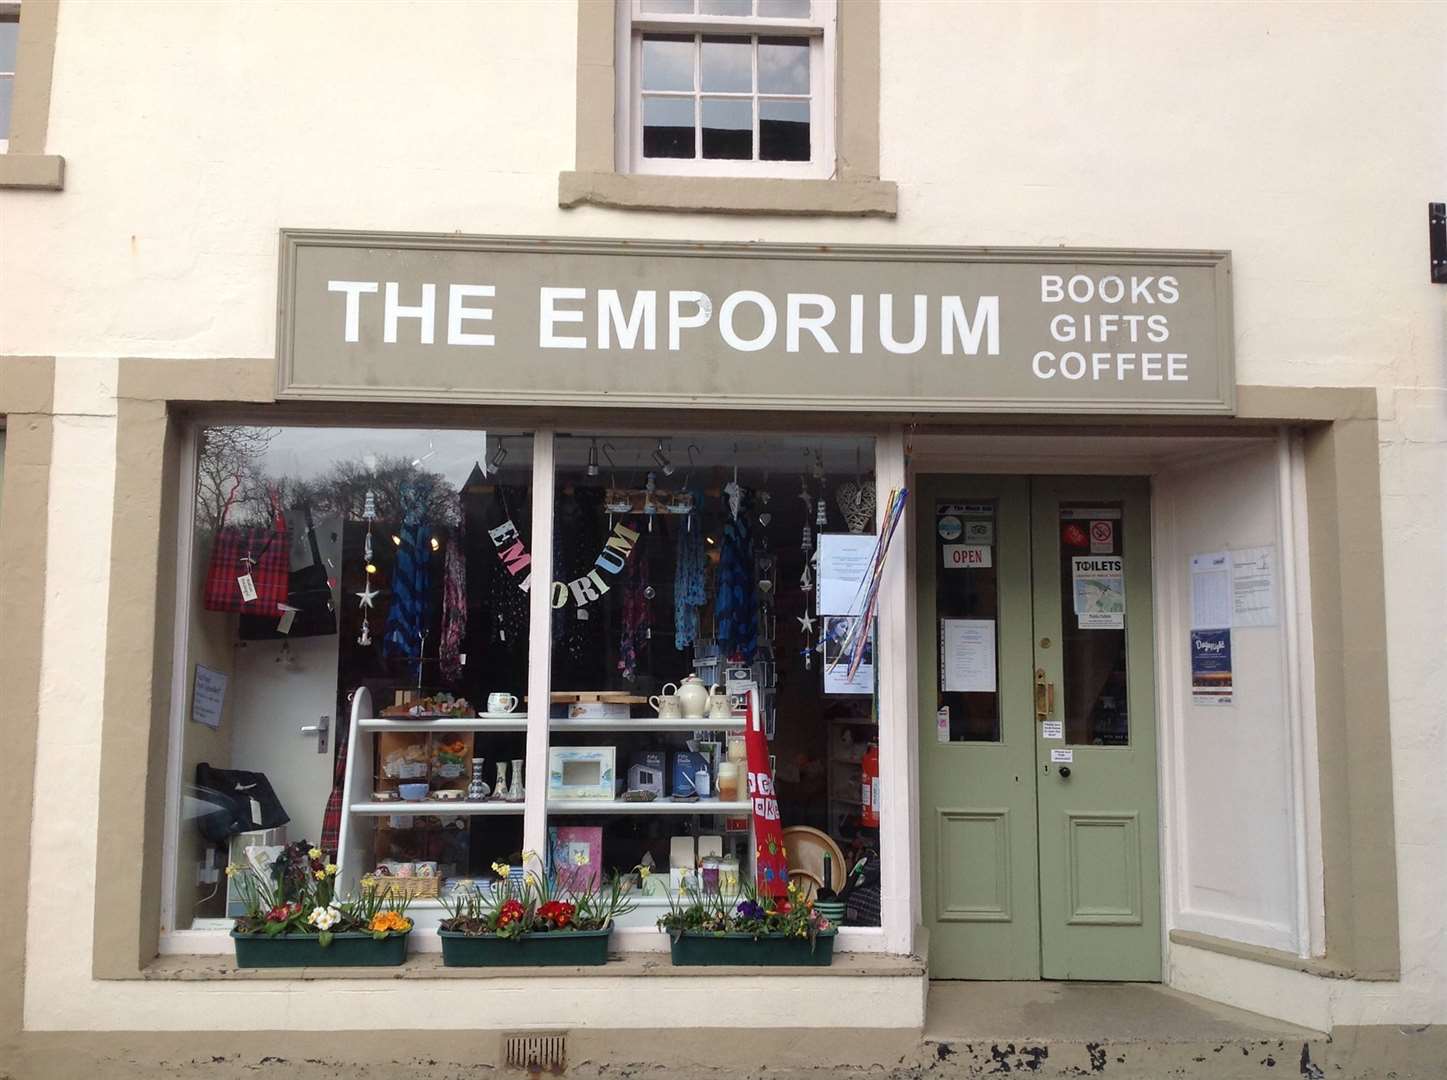 The Emporium has been a fixture on the High Street of the Black Isle village for years. Picture: The Emporium